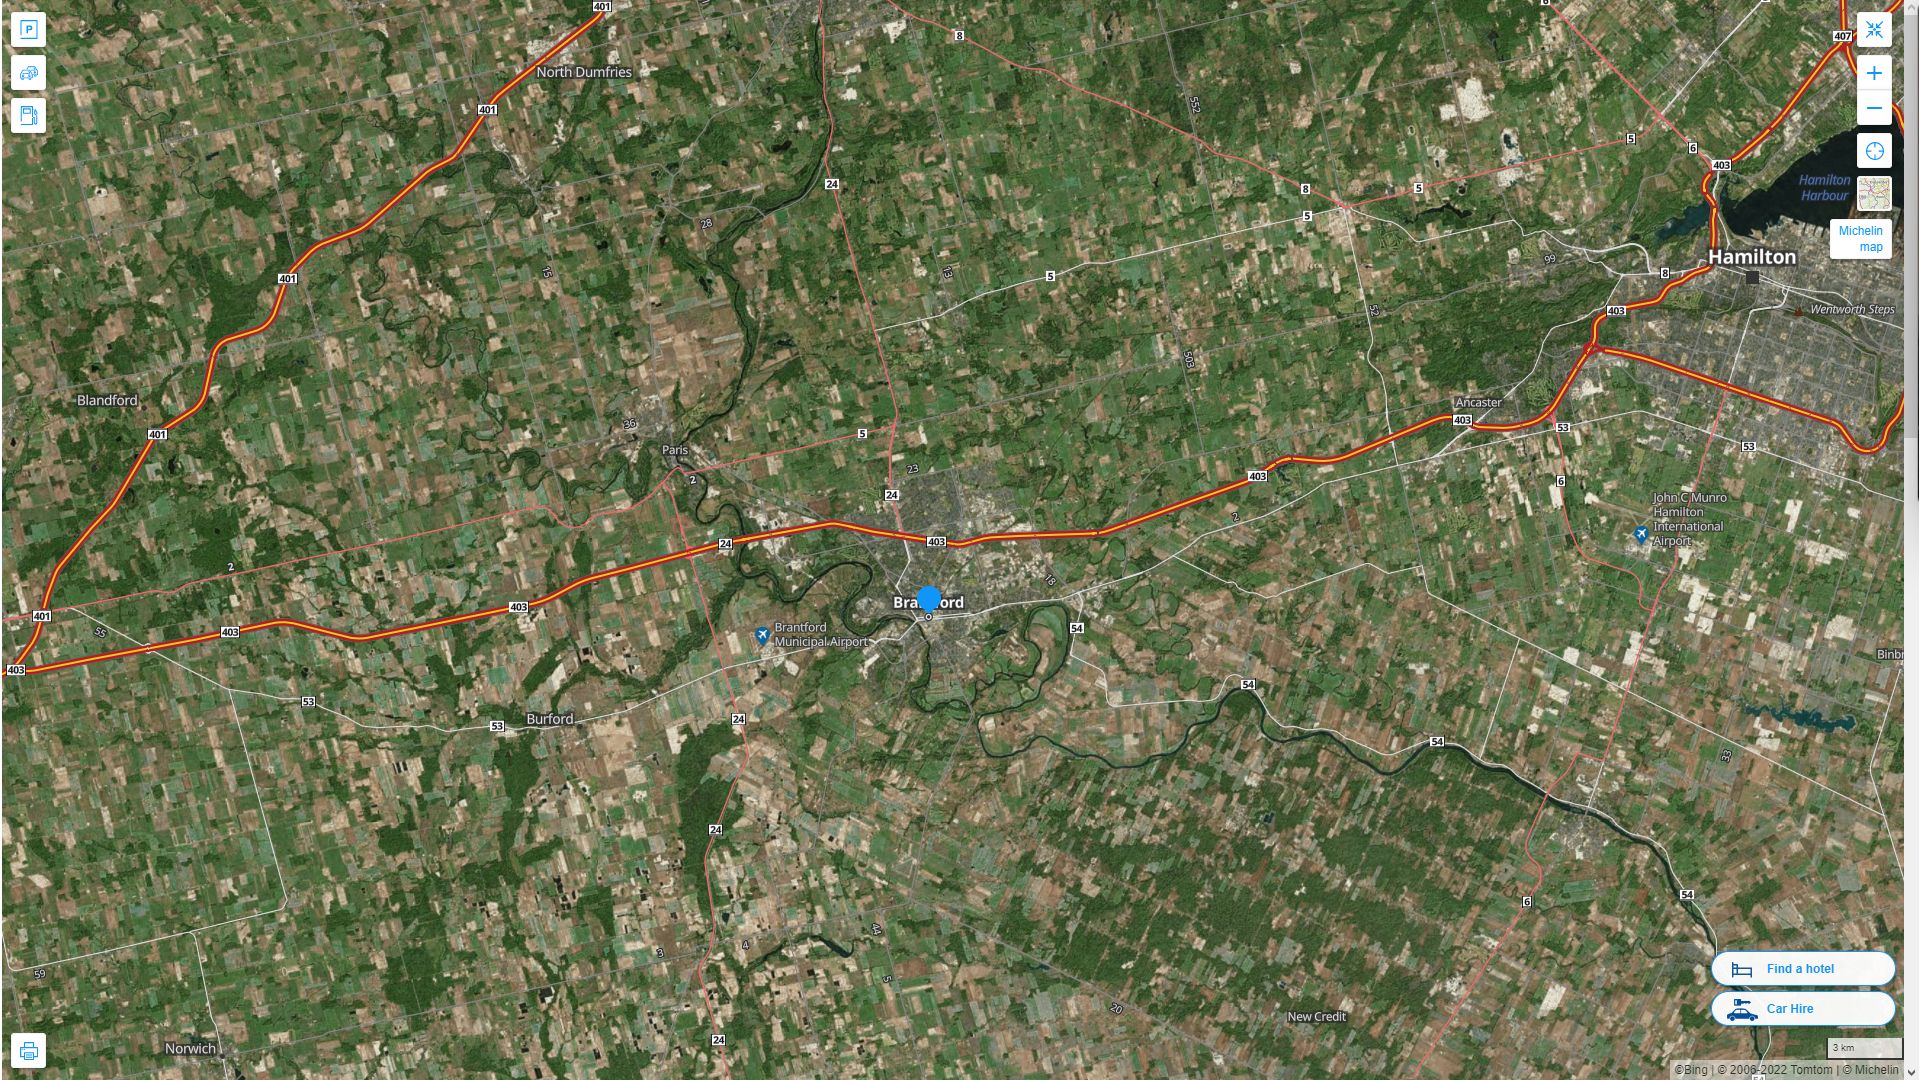 Brantford Highway and Road Map with Satellite View